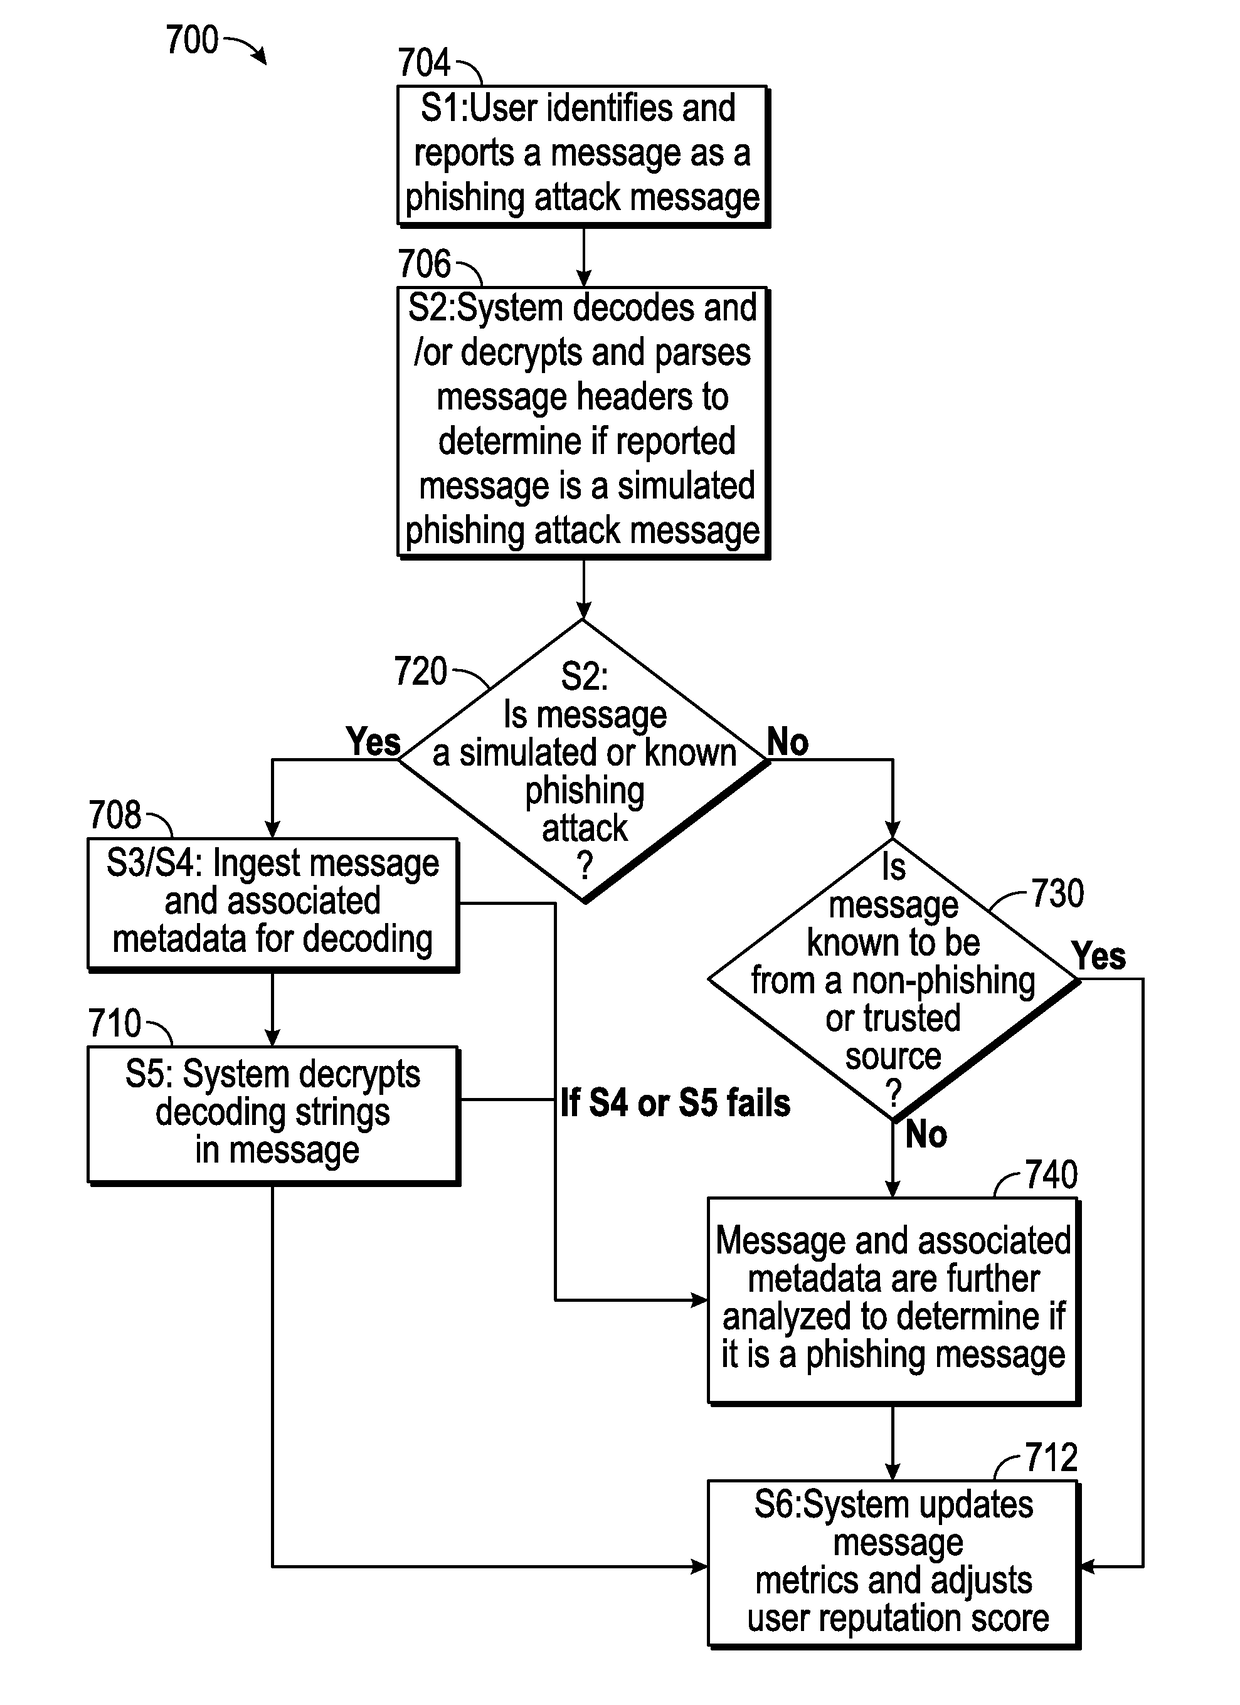 Suspicious message processing and incident response